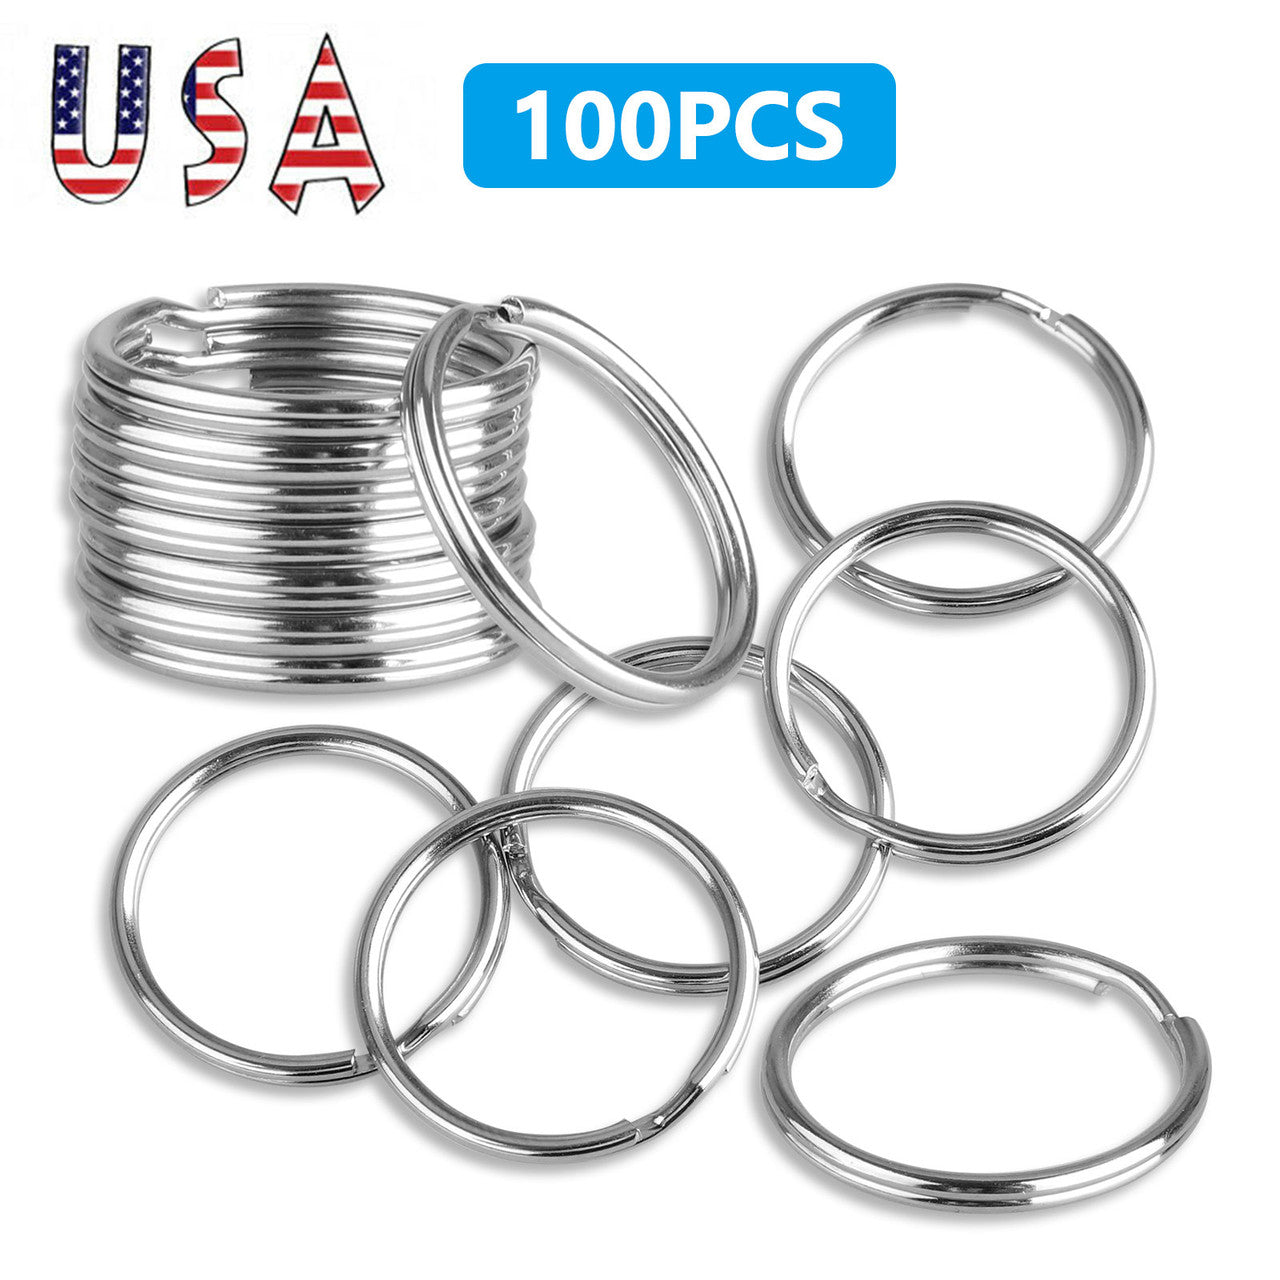 Split Key Rings Bulk for Keychain Key and Art Crafts, 25 mm/1 inch Iron Metal Round Split Ring Key Rings for Home Car Keys Attachment - Silver, 100PCS